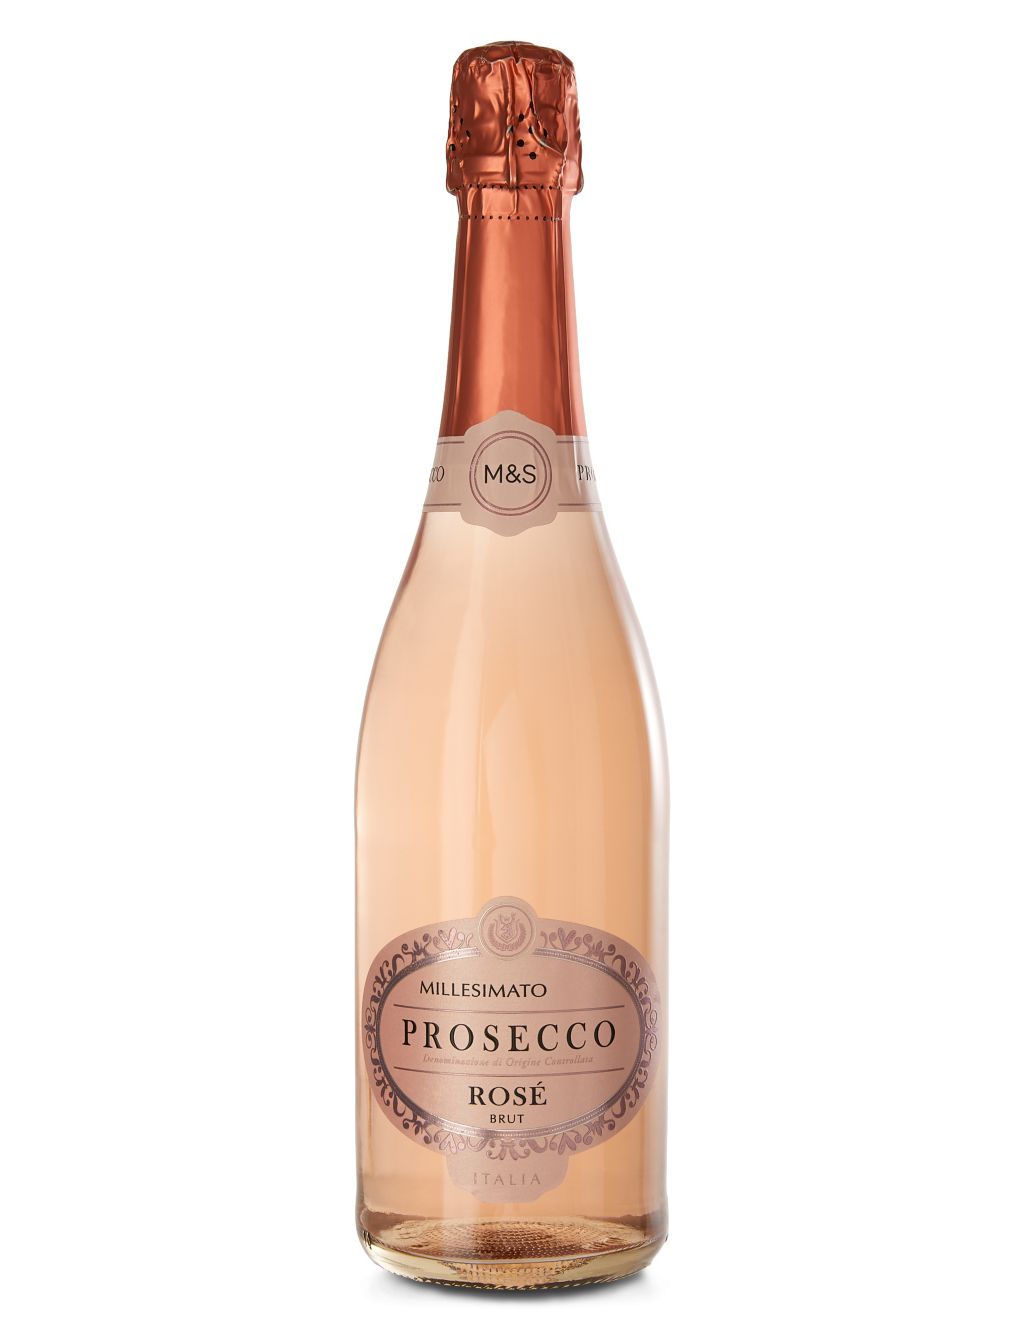 Moet & Chandon Brut & Rose Champagne Mini Moet Duo 2 x 20cl 12.5% ABV :  : Grocery